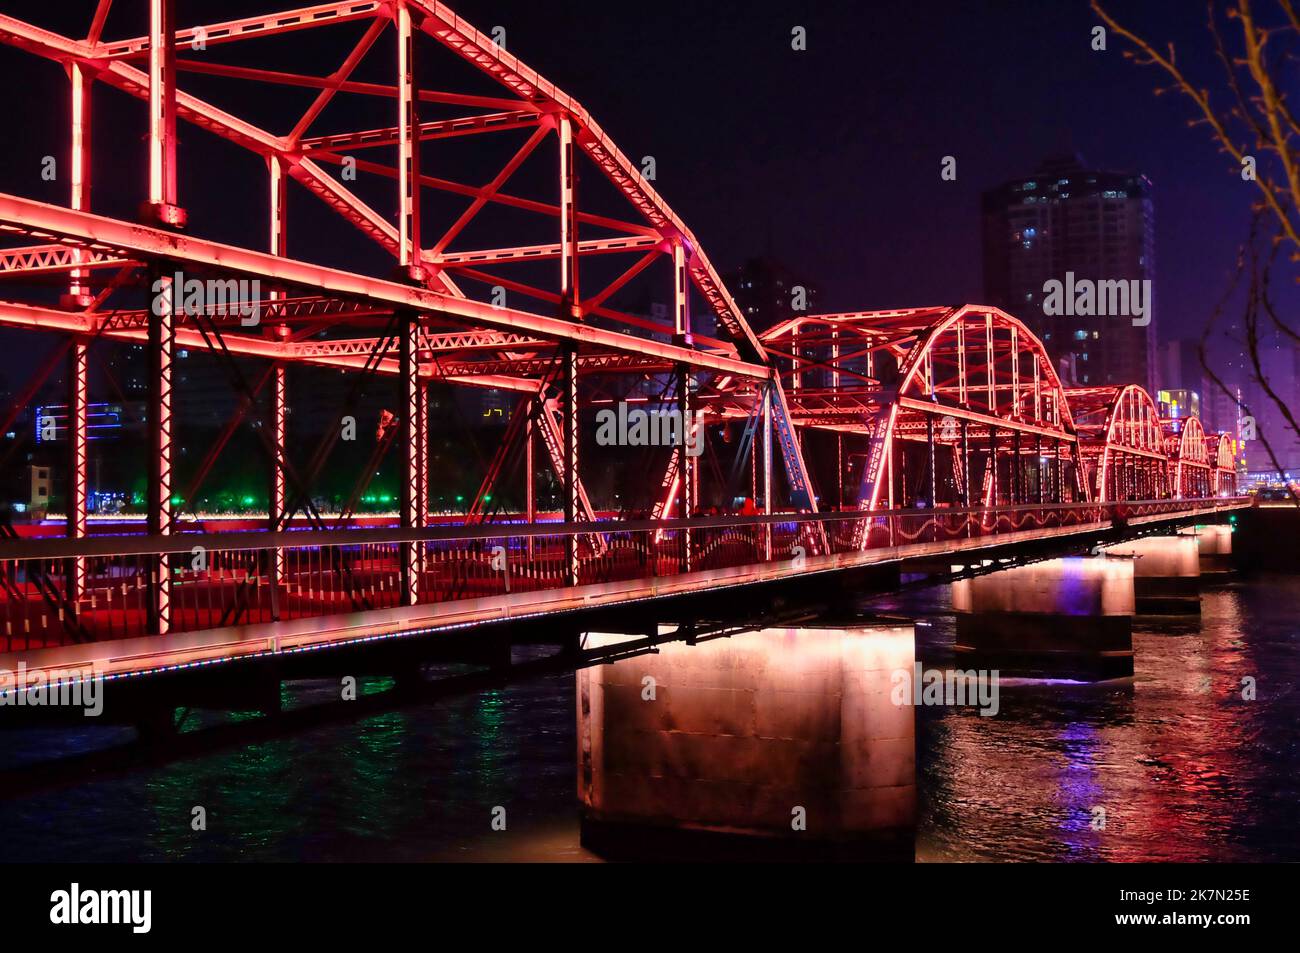 The Zhongshan Bridge over the Lanzhou Yellow River illuminated by red lights at the night Stock Photo